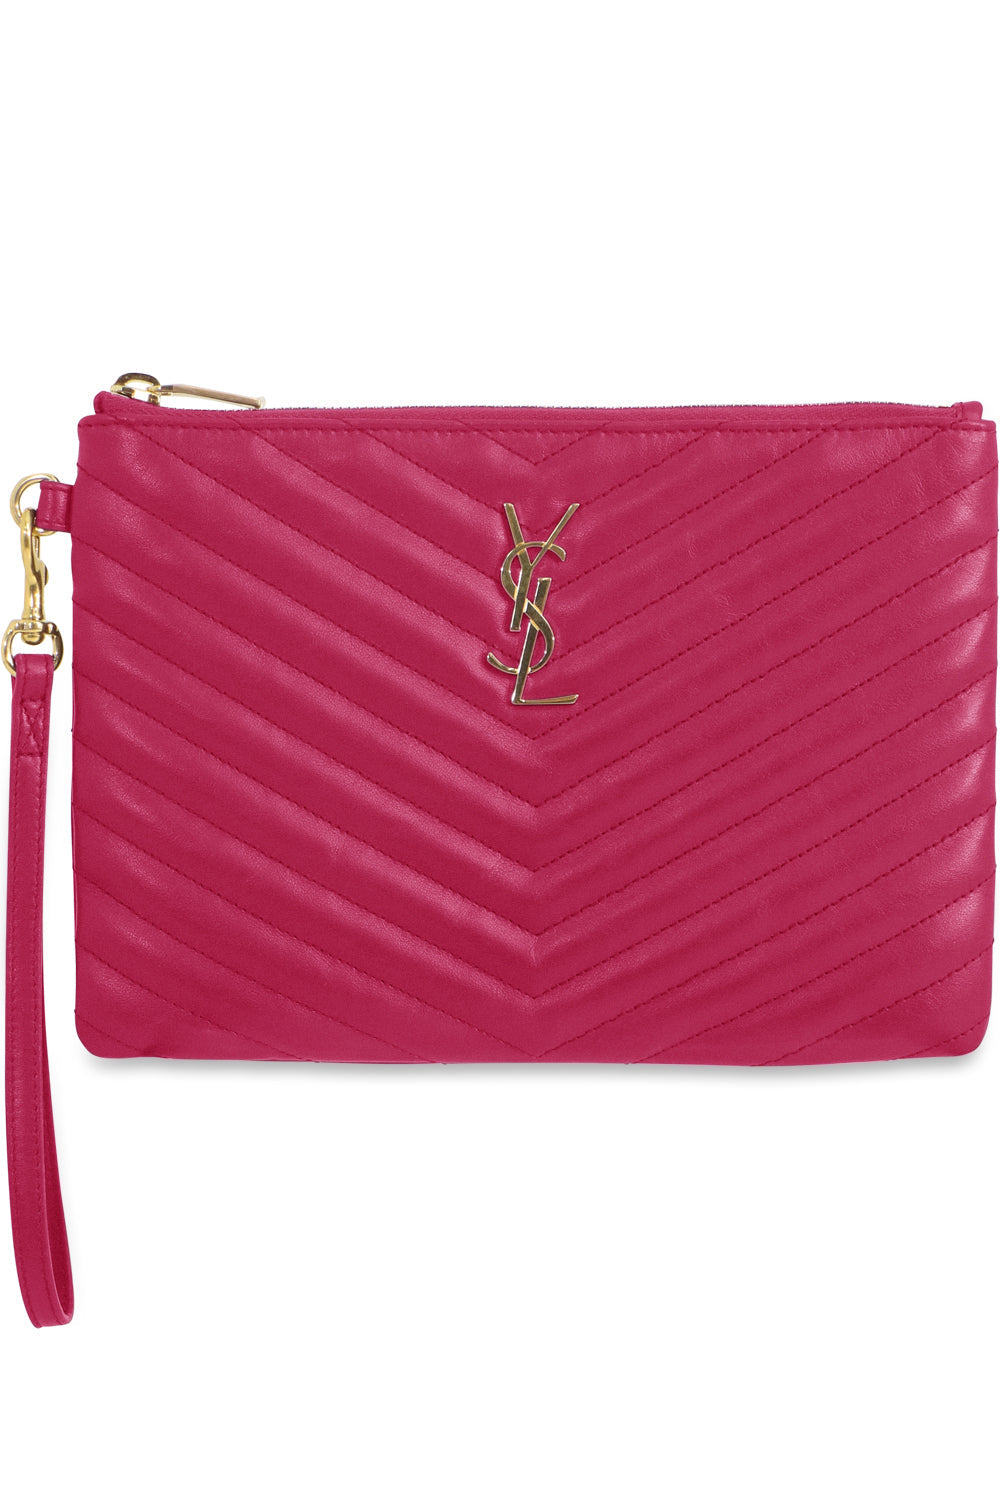 SAINT LAURENT BAGS MULTI SMALL MONOGRAMME QUILTED POUCH | FUSCHIA/GOLD